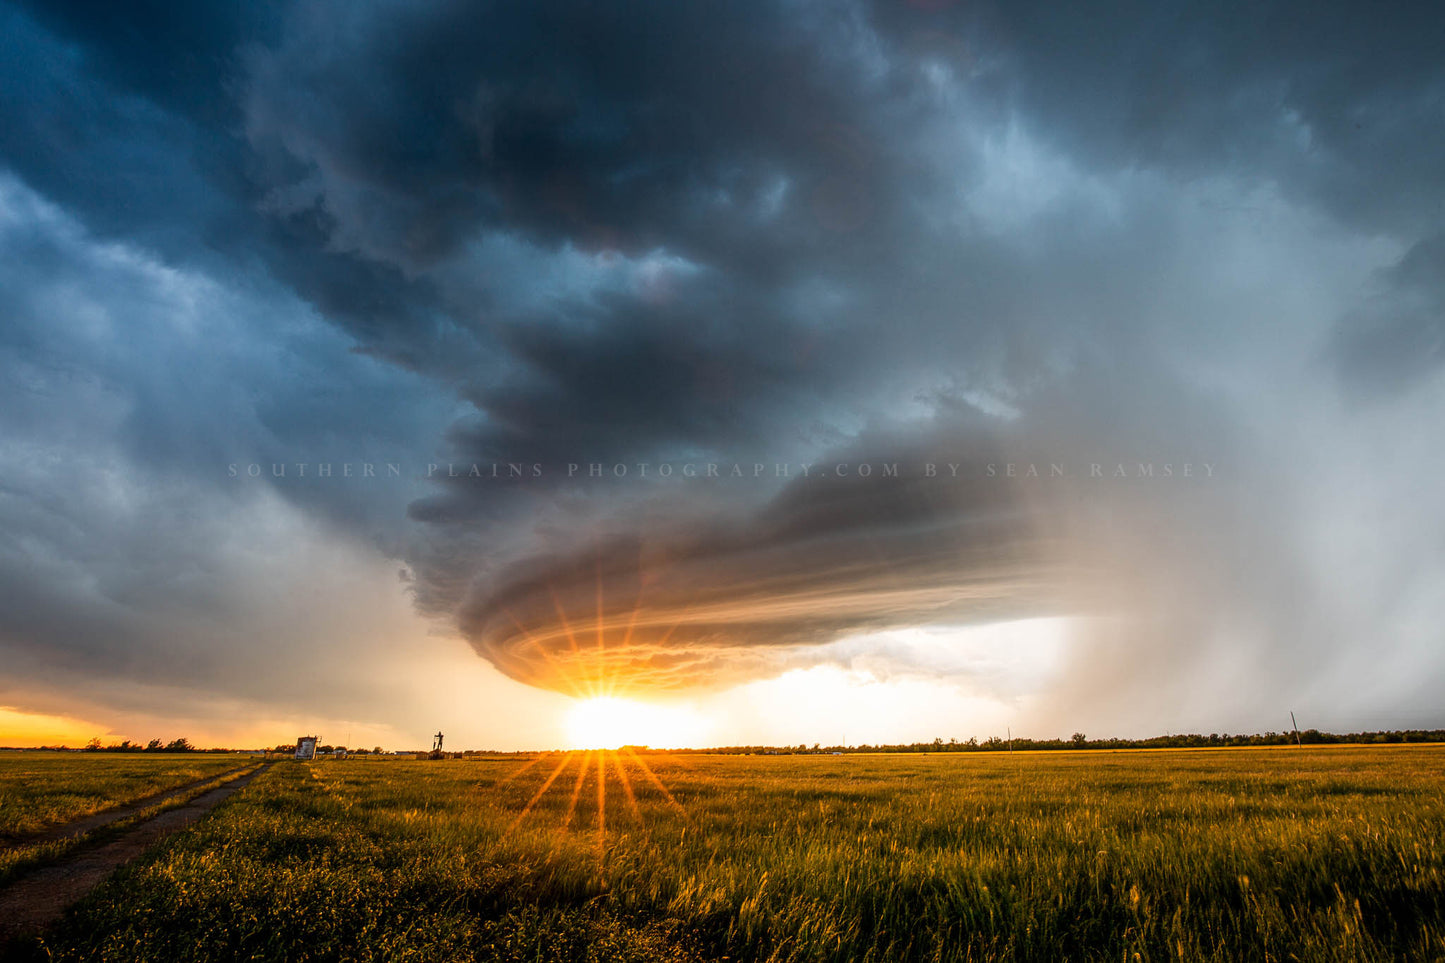 Storm photography print of a supercell thunderstorm advancing over a field as the sun twinkles over the landscape on a stormy spring evening in Oklahoma by Sean Ramsey of Southern Plains Photography.